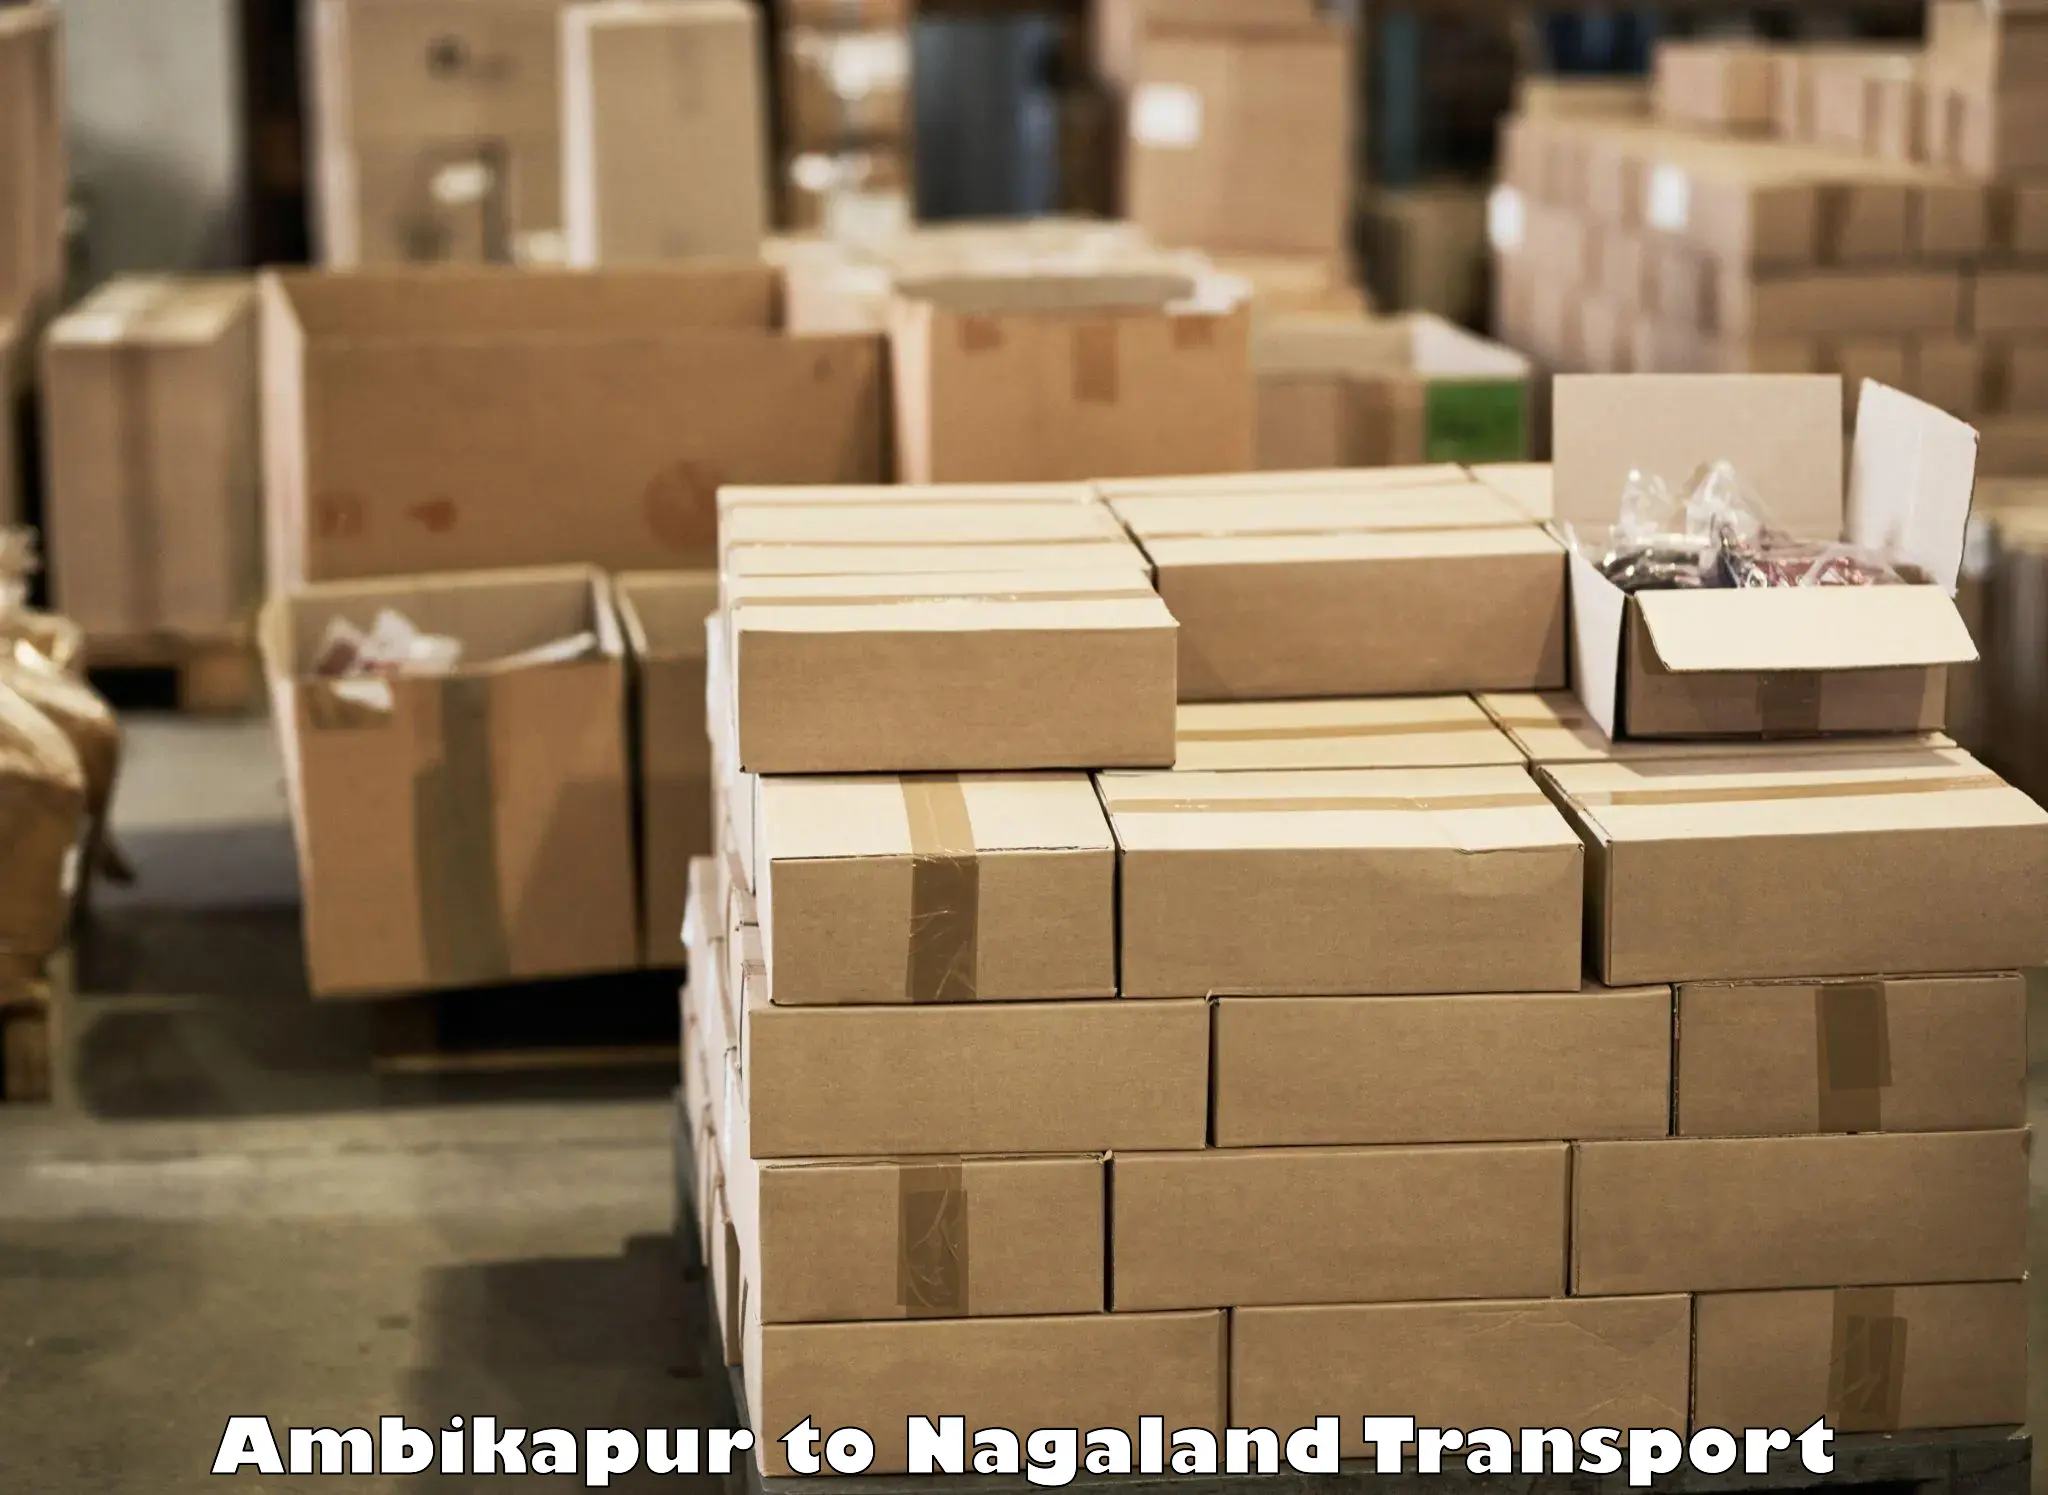 Truck transport companies in India Ambikapur to Longleng